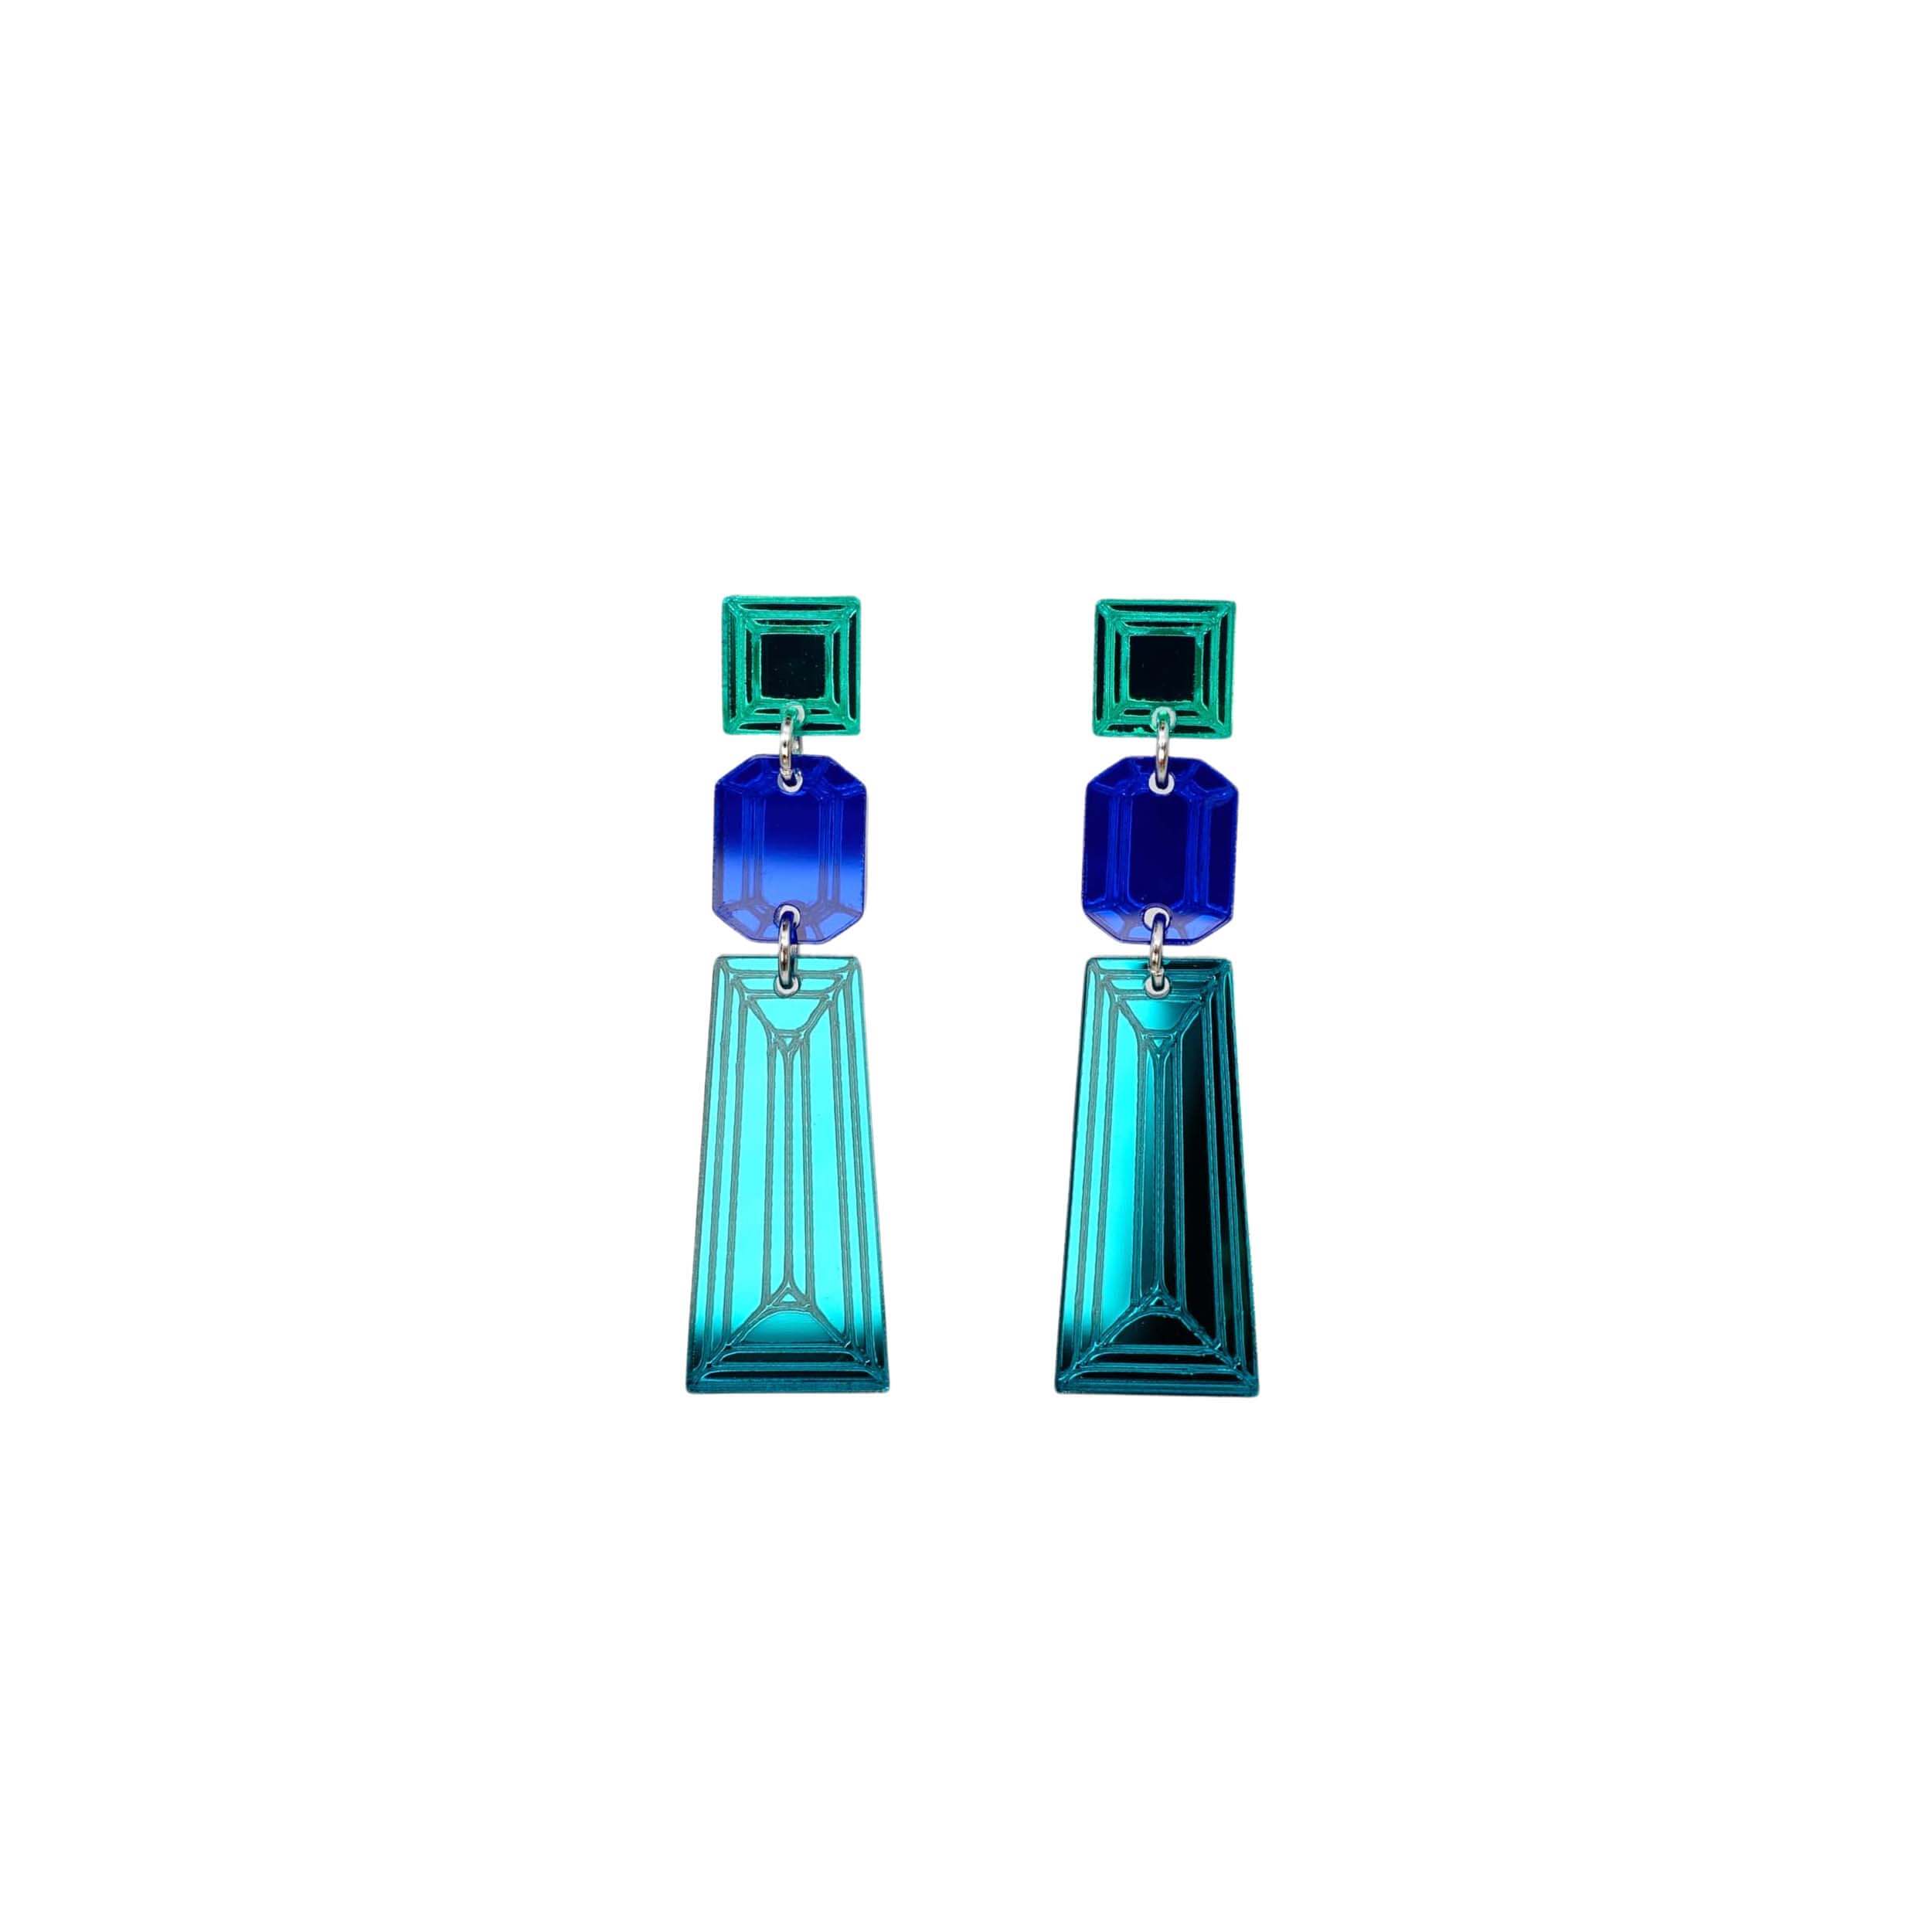 Long Deco drop earrings in teal, electric blue and electric green, shown hanging against a white background. 